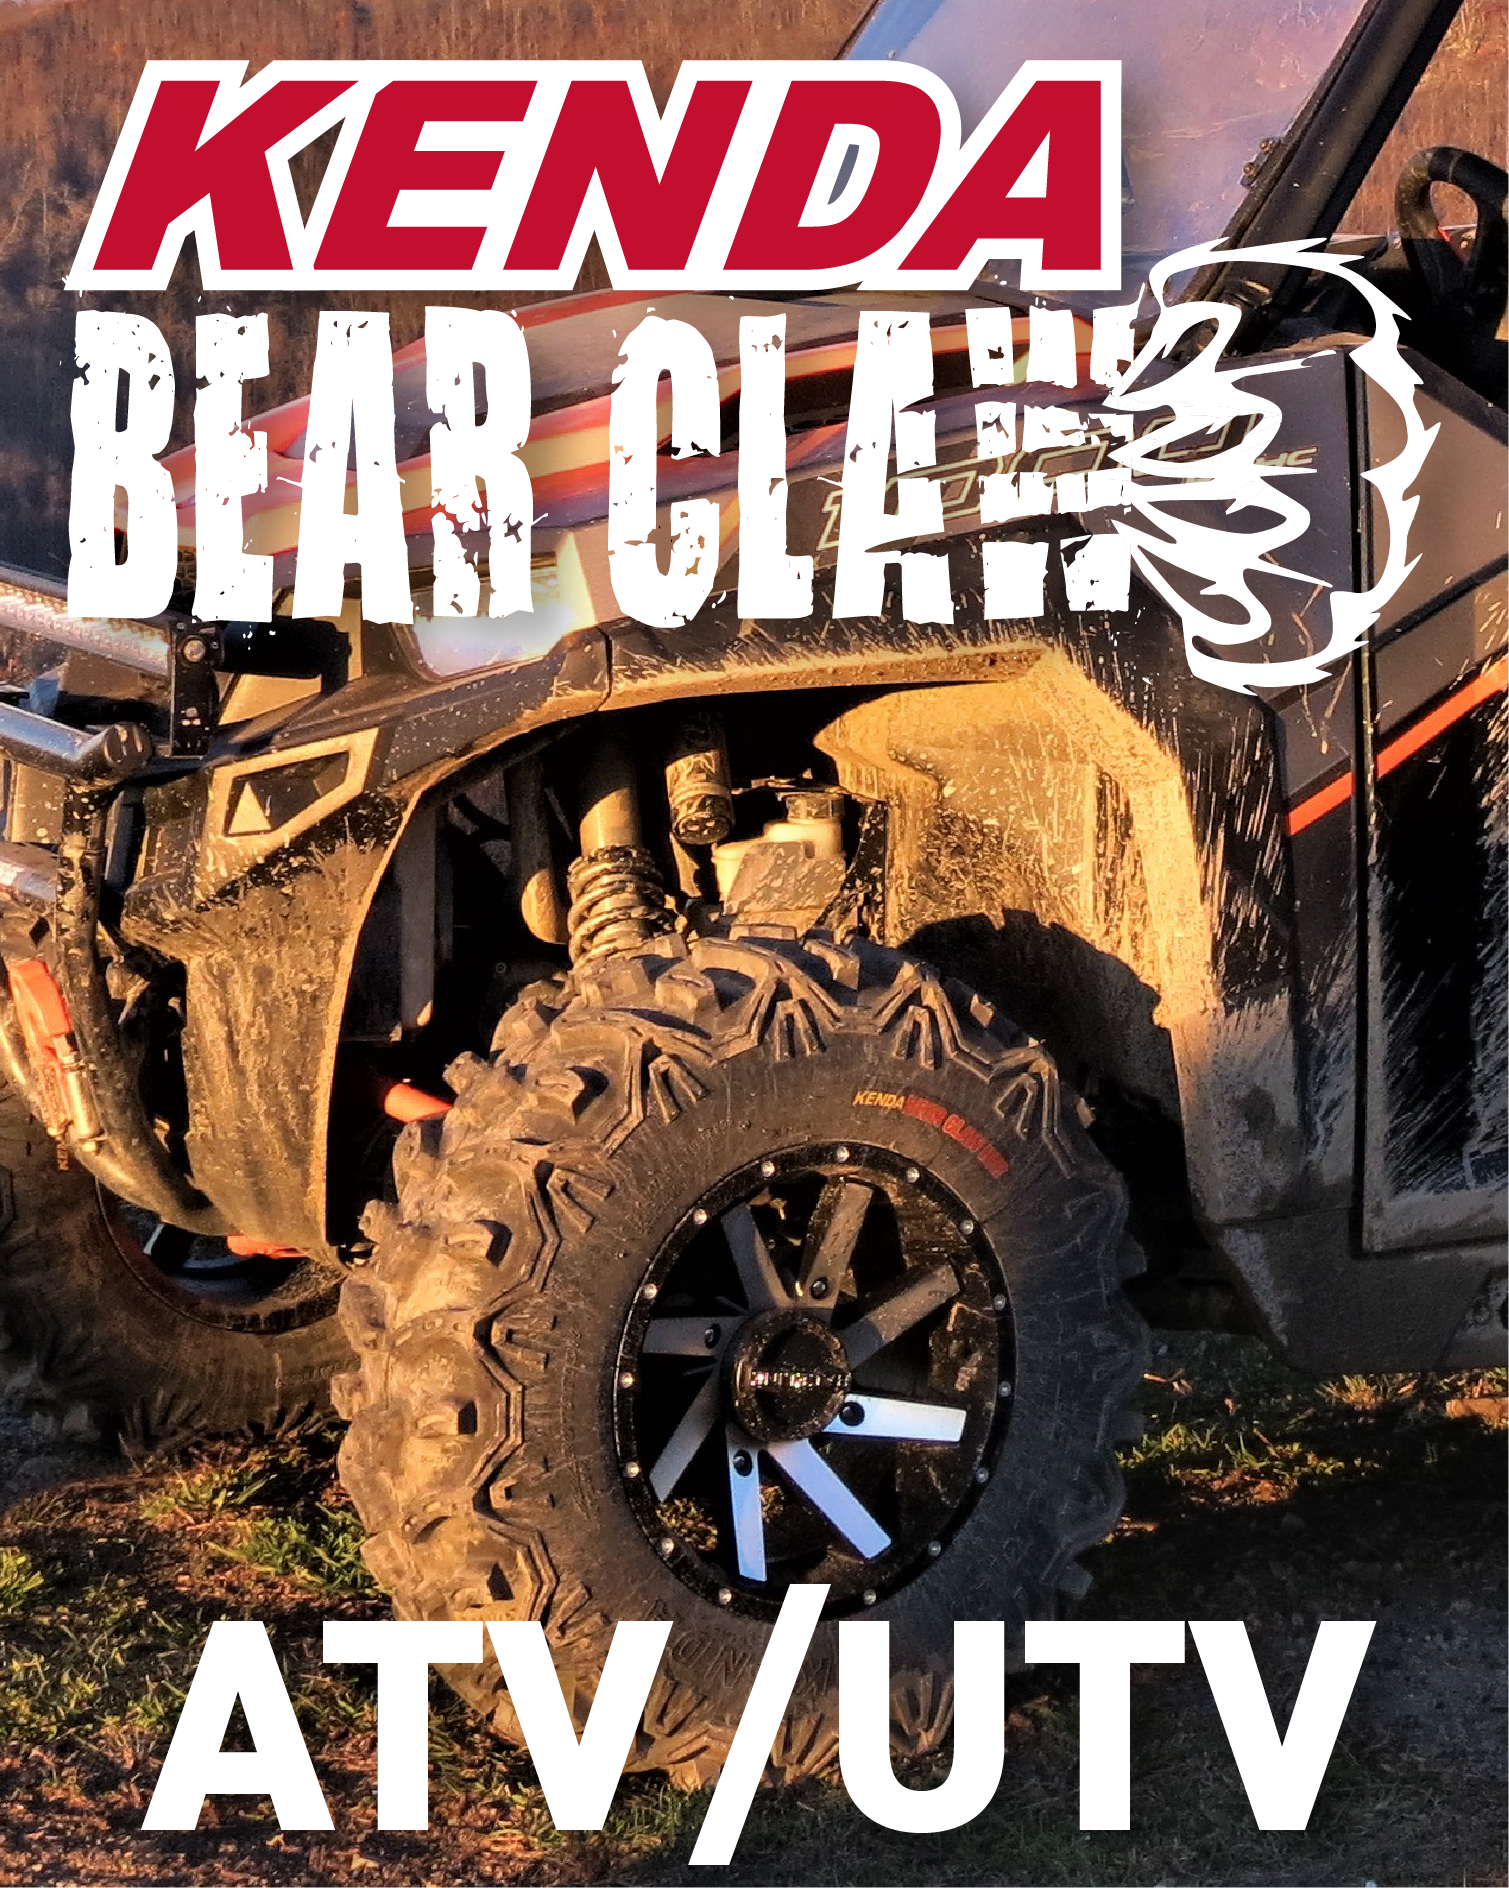 Kenda Bear Claw EX 23x8-10 Front ATV 6 PLY Tires Bearclaw 23x8x10 - 2 Pack